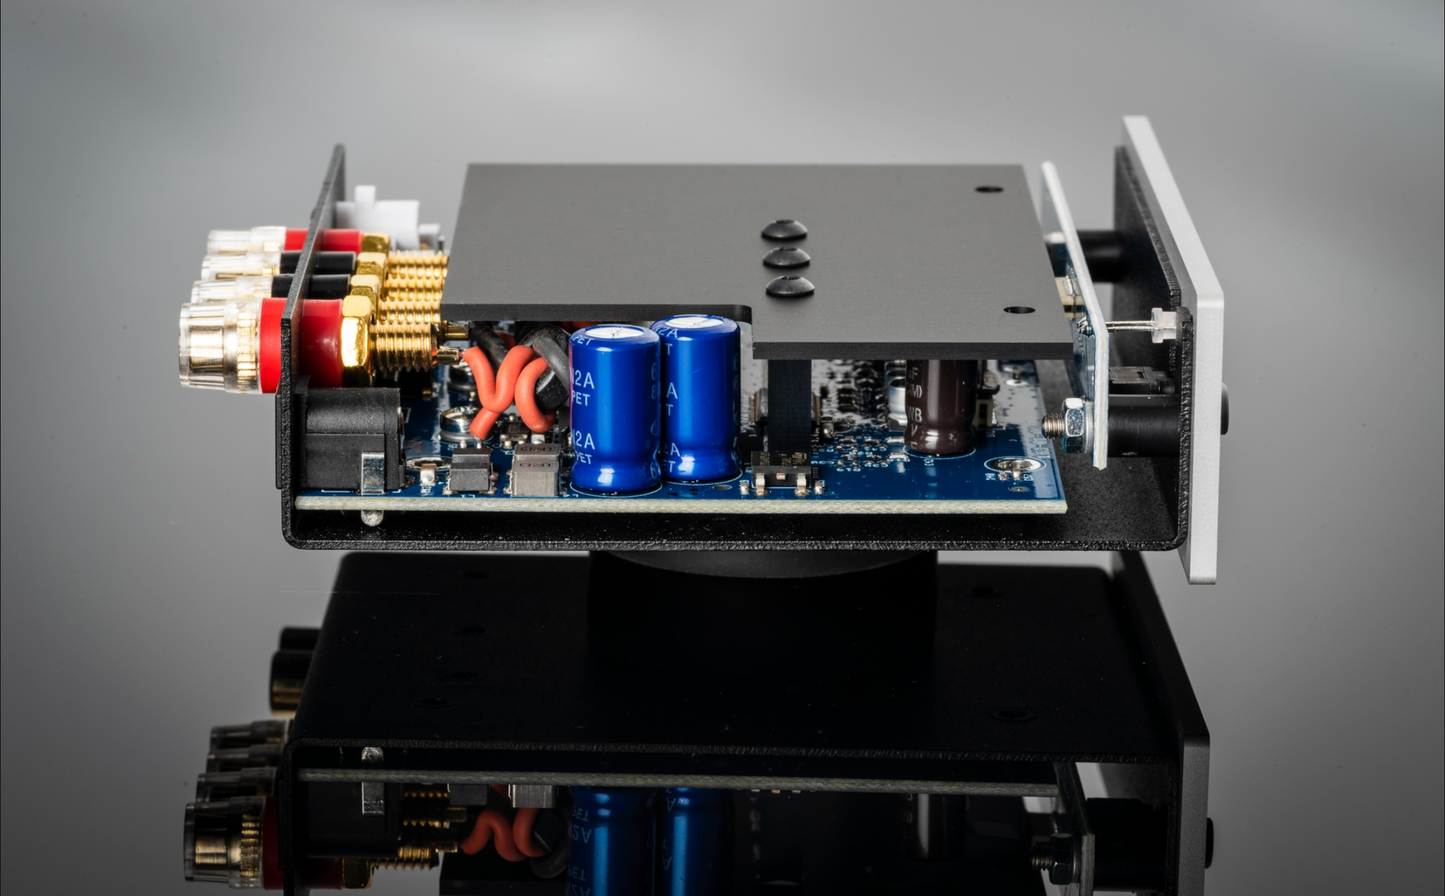 ProJect Amp Box S3 Power Amplifier, in silver internal components of unit